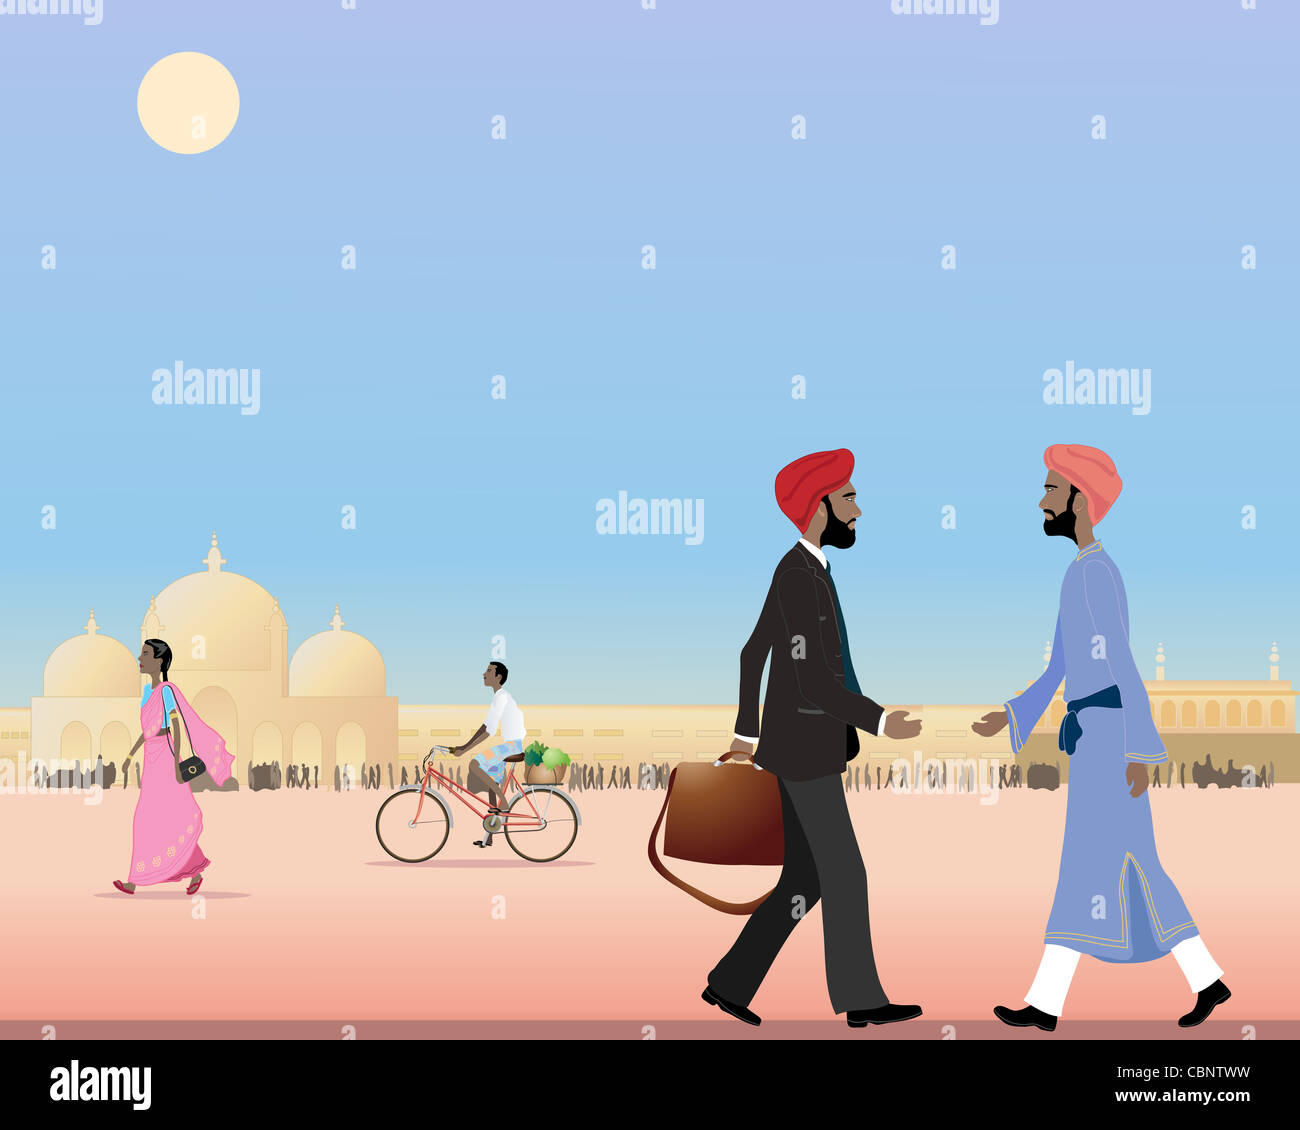 an illustration of two sikh men meeting in a busy street in india under a blue sky Stock Photo